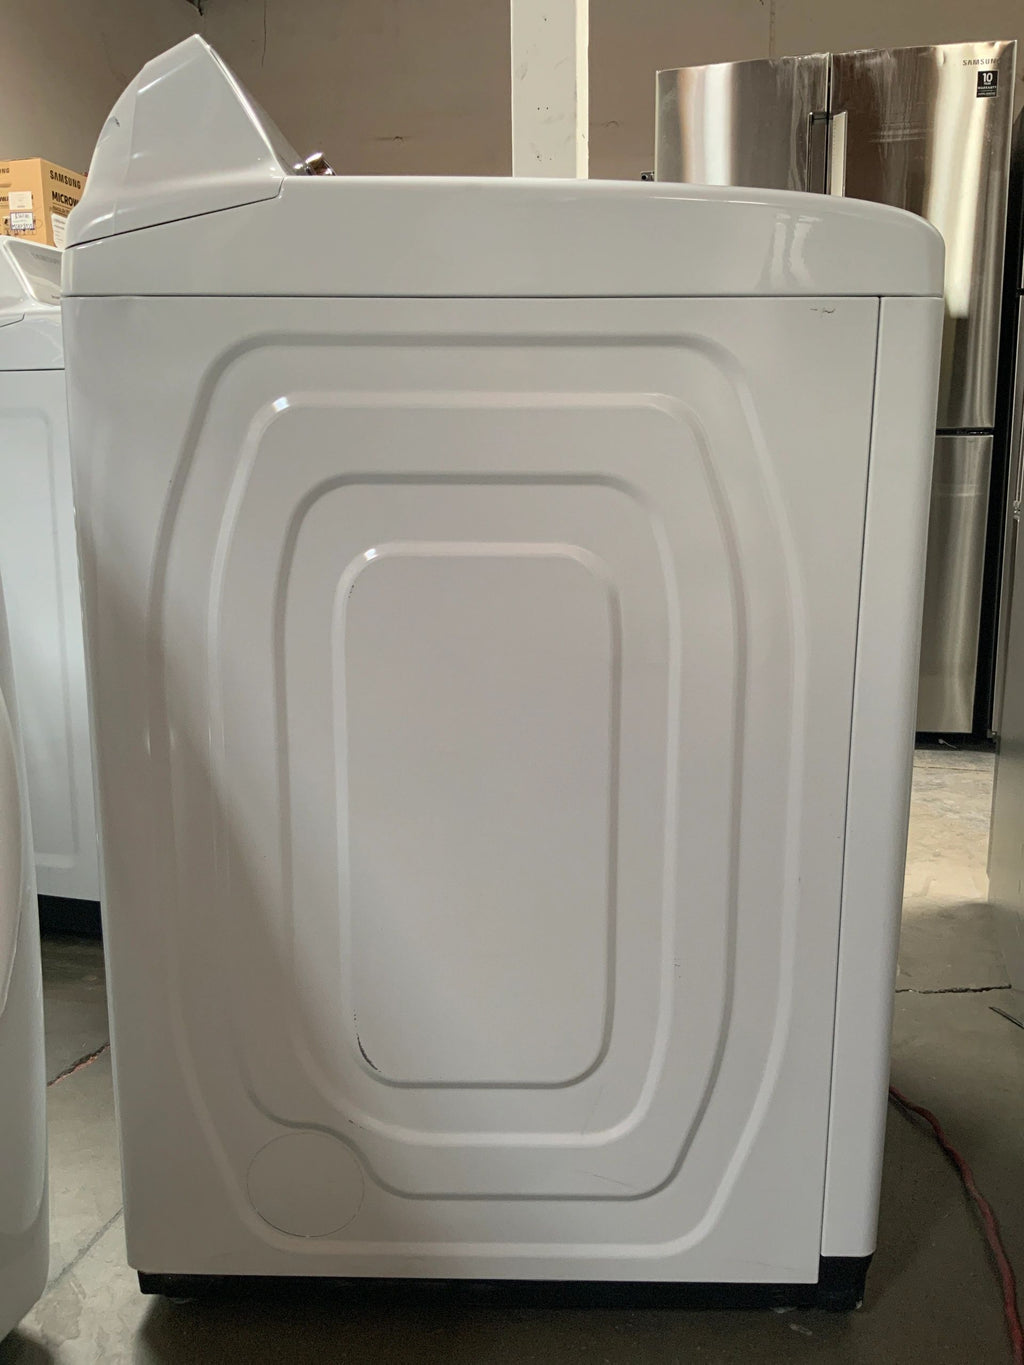 New Open Box. Set of Washer 5.0 cu. ft. High-Efficiency Top Load Washer in White, ENERGY STAR and Dryer 7.4 cu. ft. Electric Dryer with Steam in White. Model: WA50M7450AW, DVE50M7450W